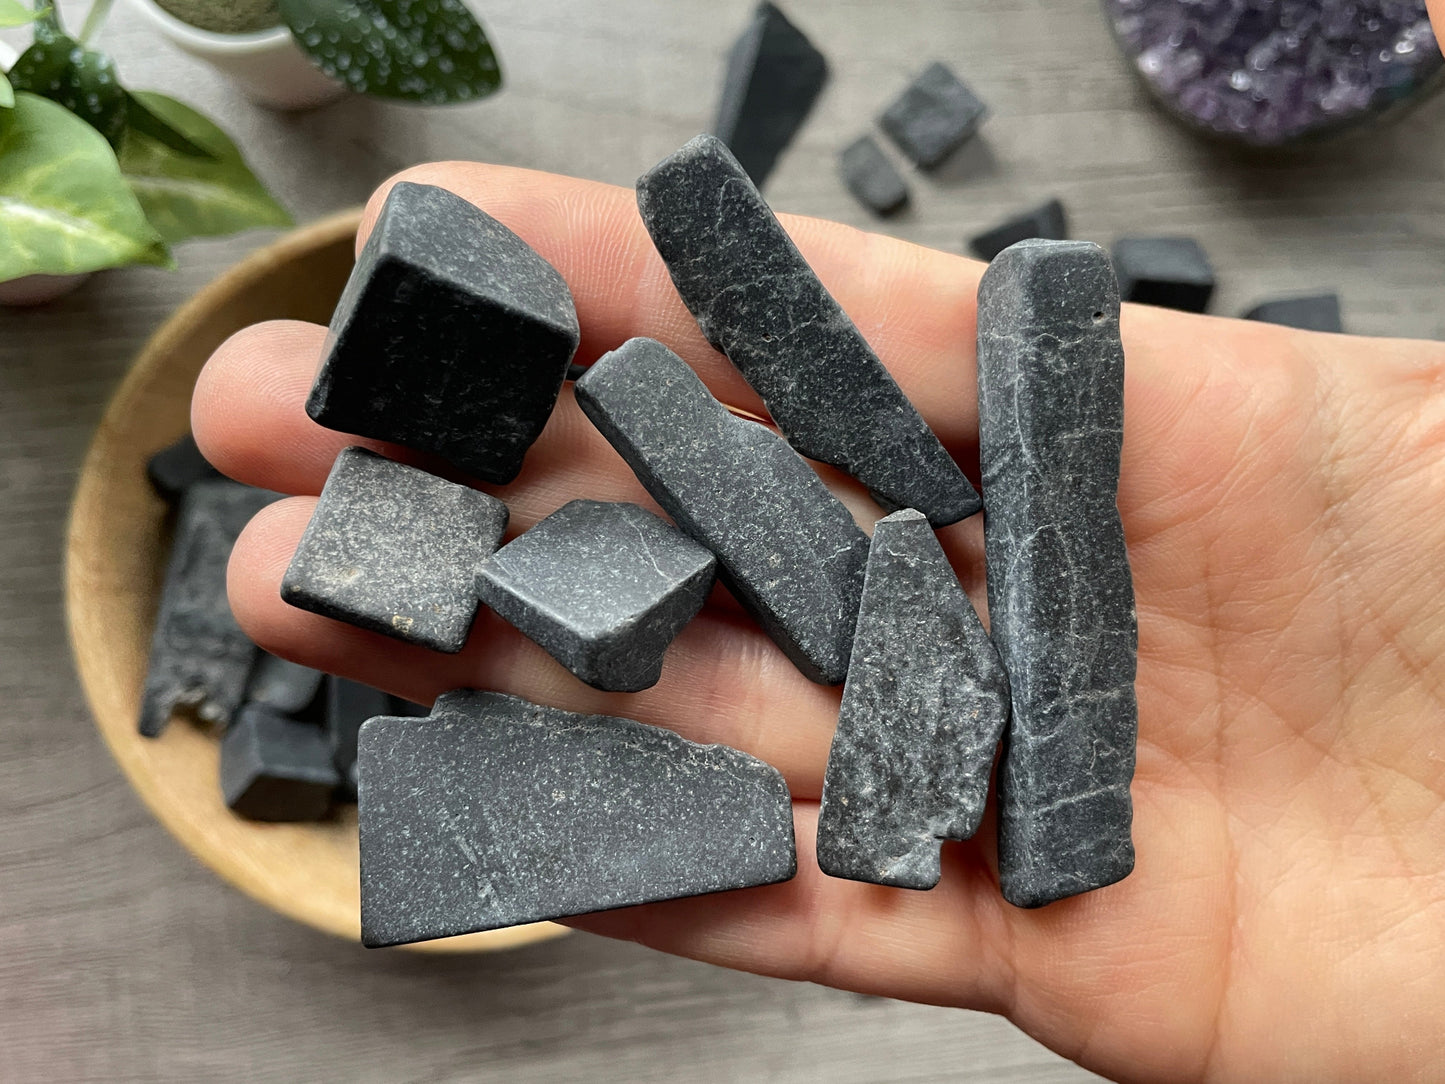 Pictured are various pieces of raw shungite.